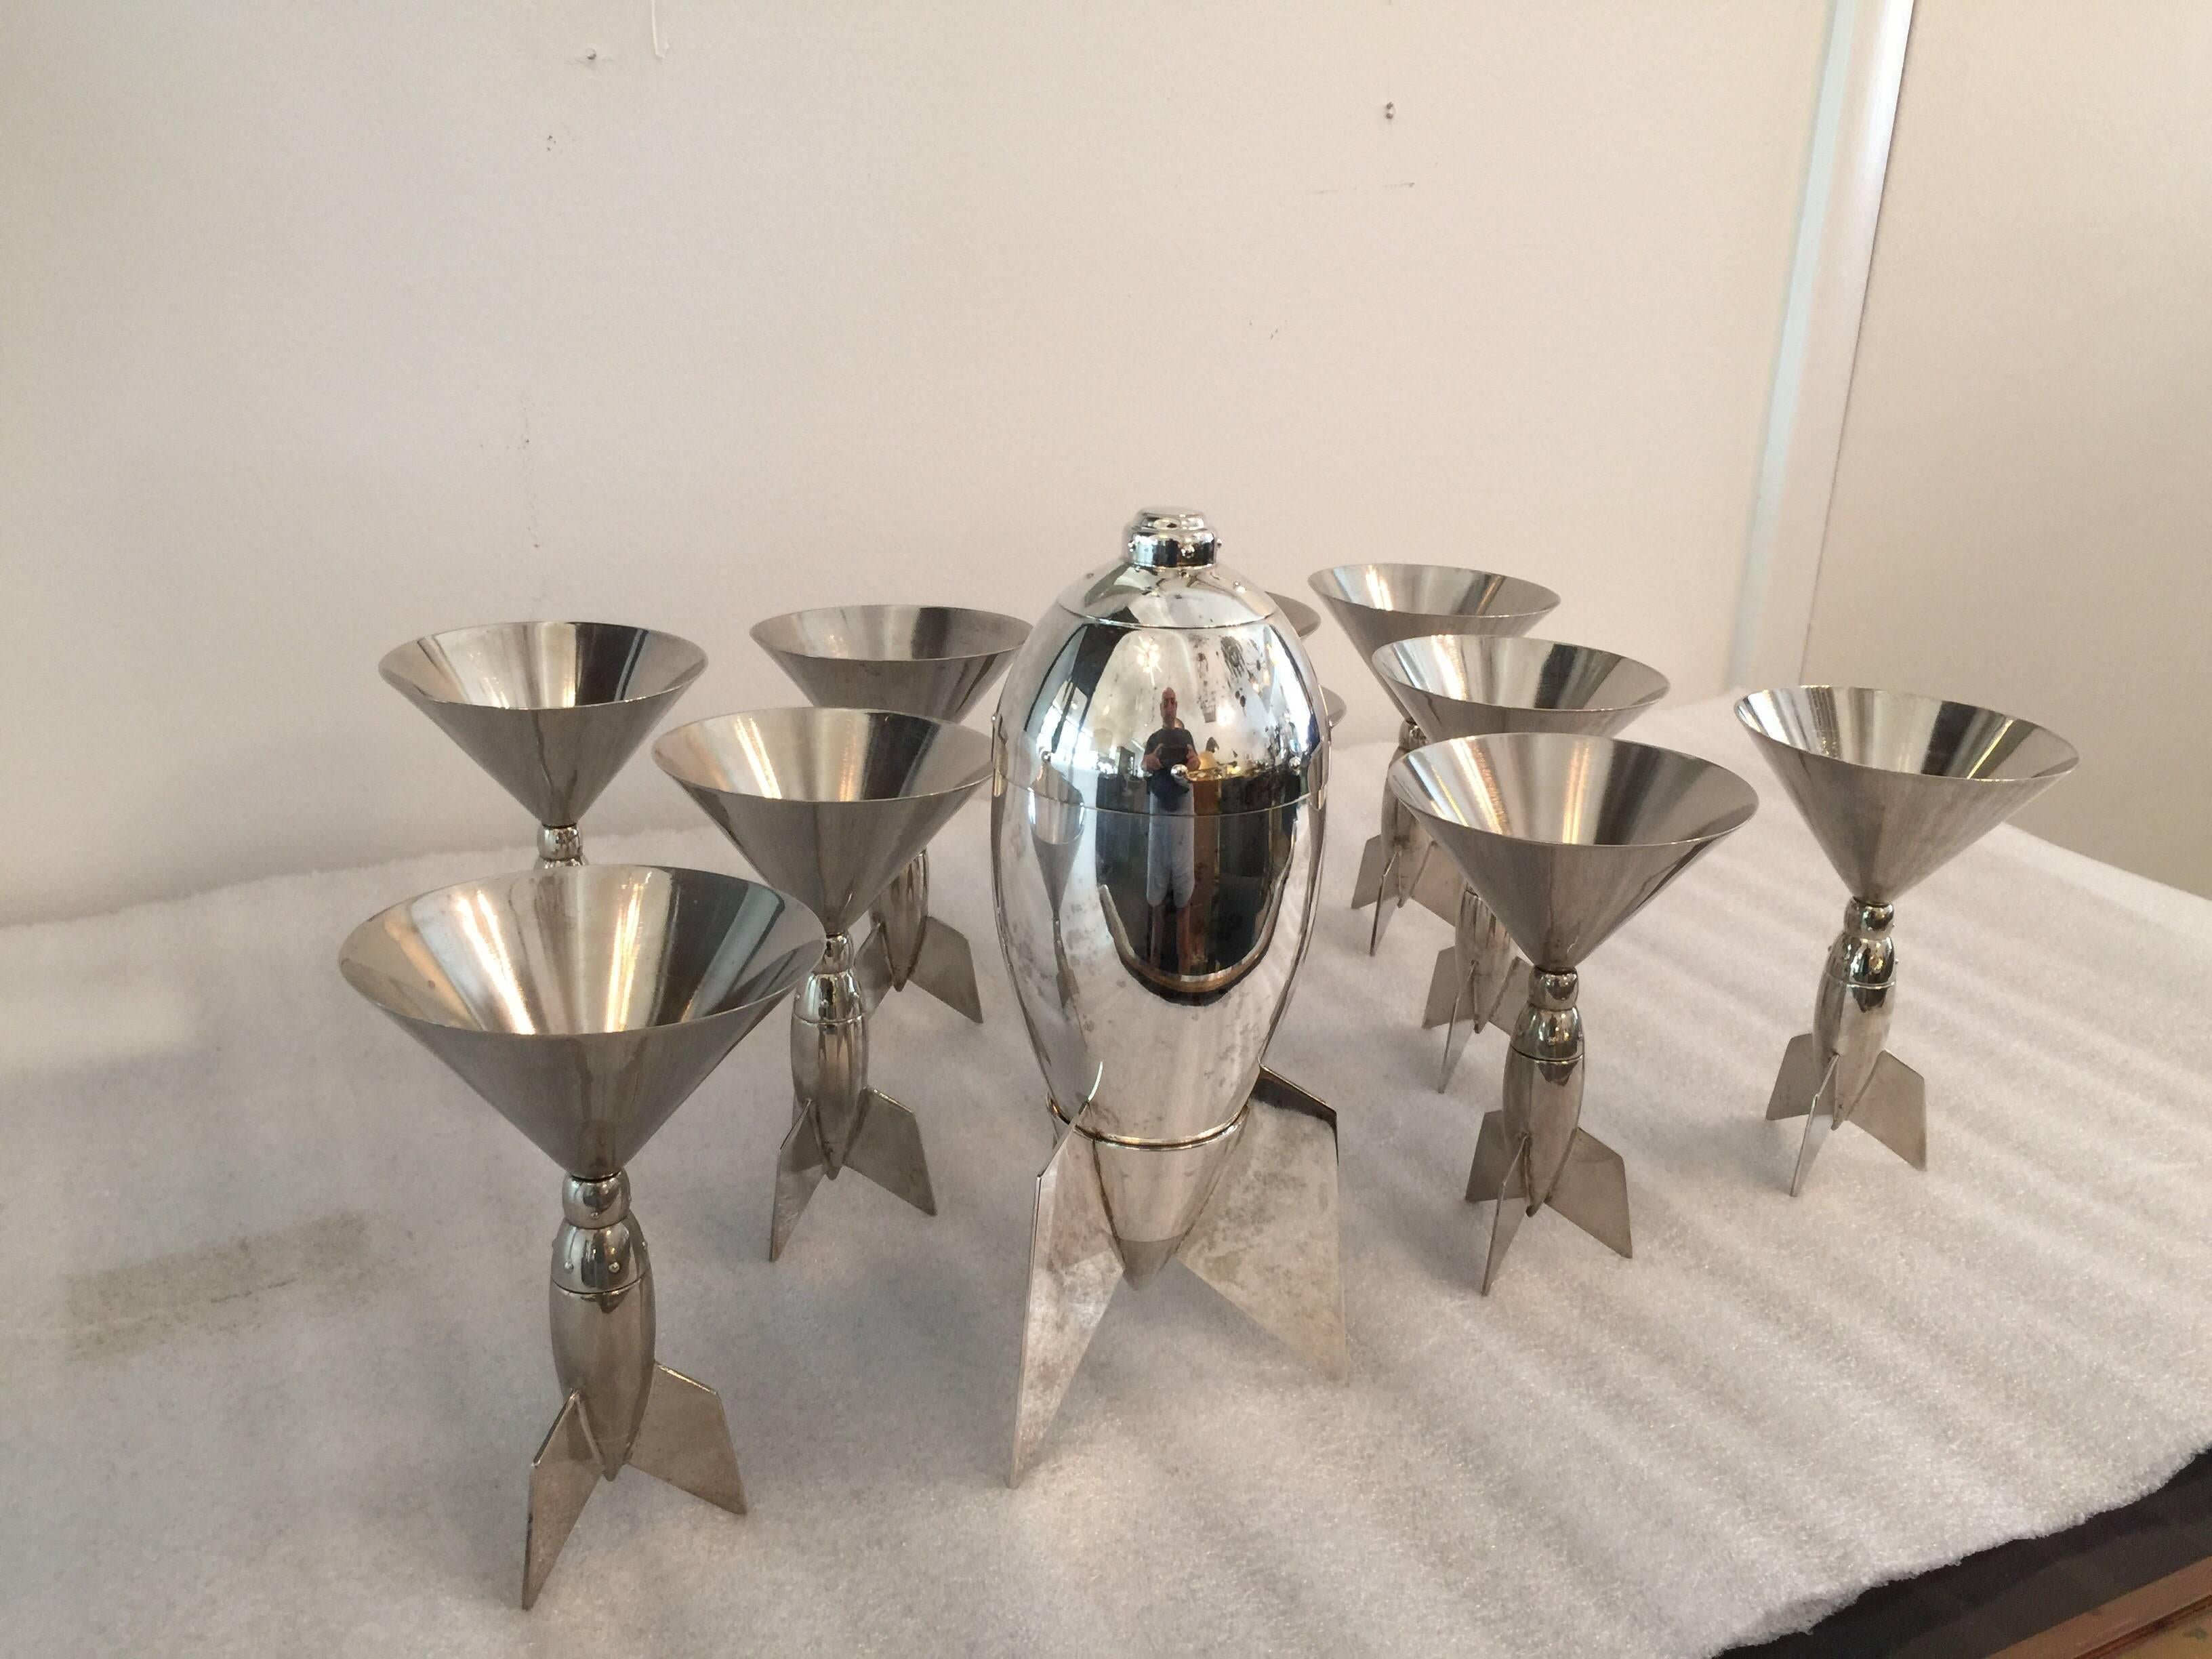 This is a beyond amazing grouping of ten martini glasses with rocket ship design - very Cold War era and rare to find such a large set (ten glasses and shaker). The shaker stands on a base appearing like a rocket. Signed Godinger, very rare! 